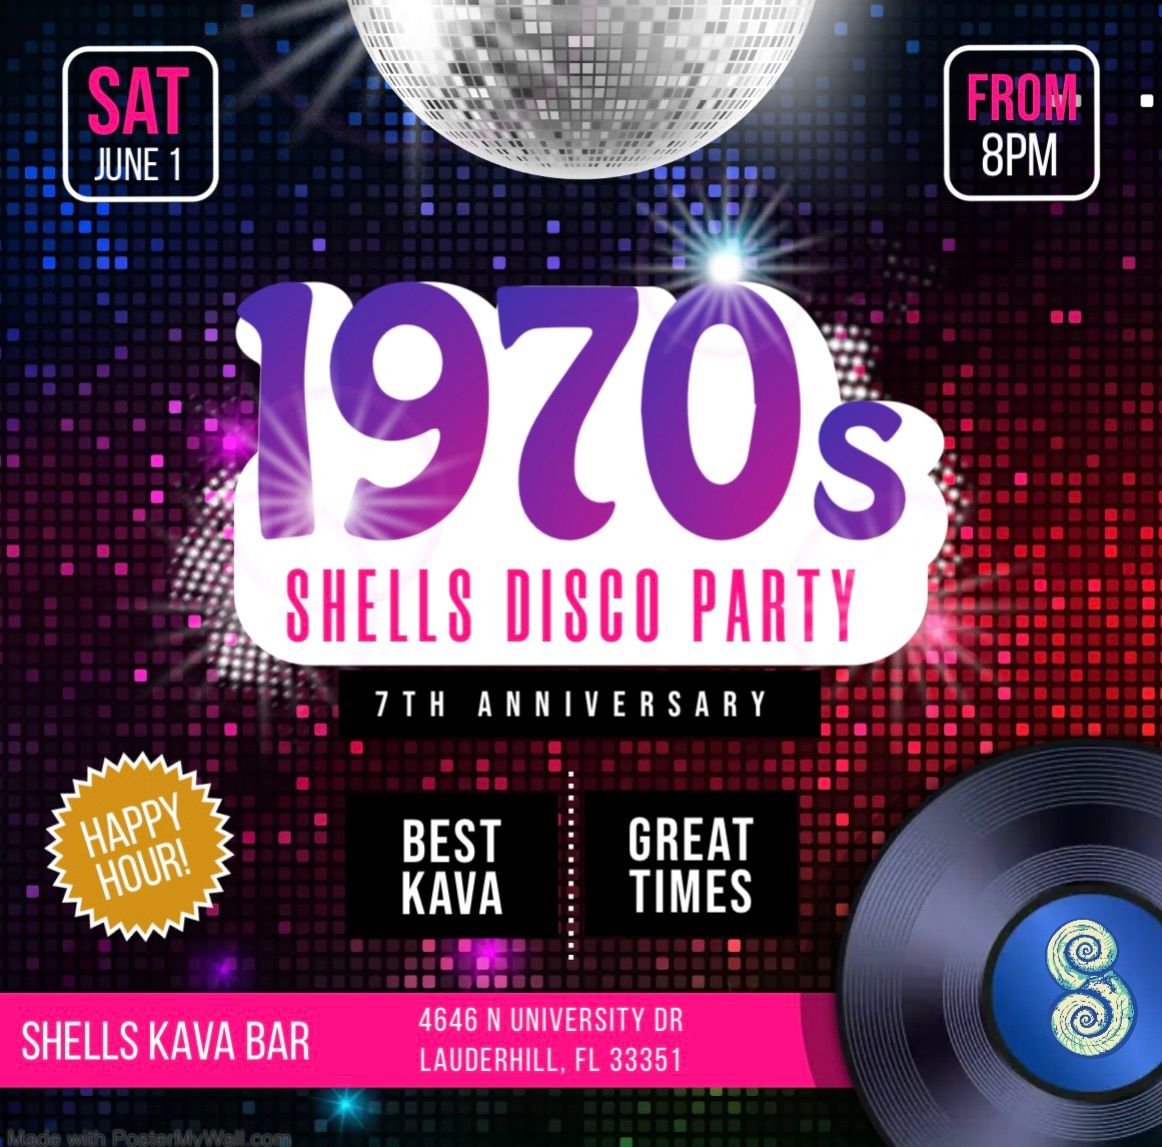 Shells 7th Anniversary 70s Disco Party!